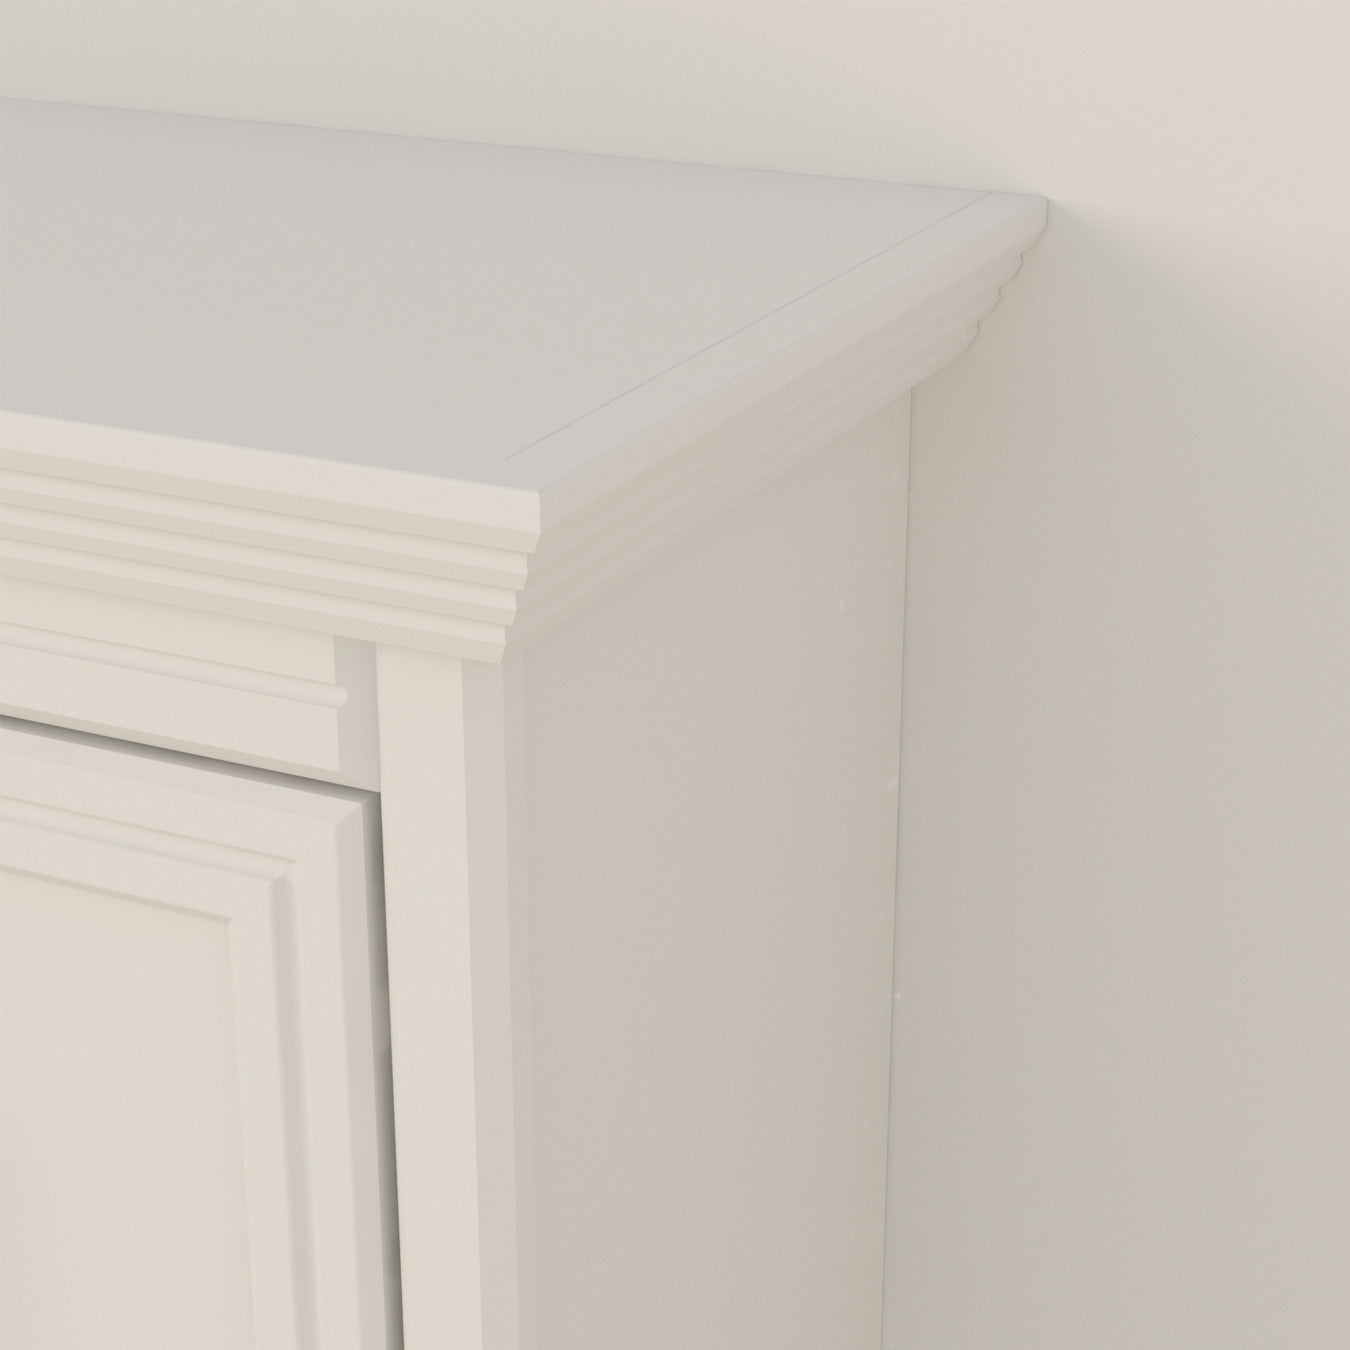 top shelf molding of the adonis full size horizontal murphy bed